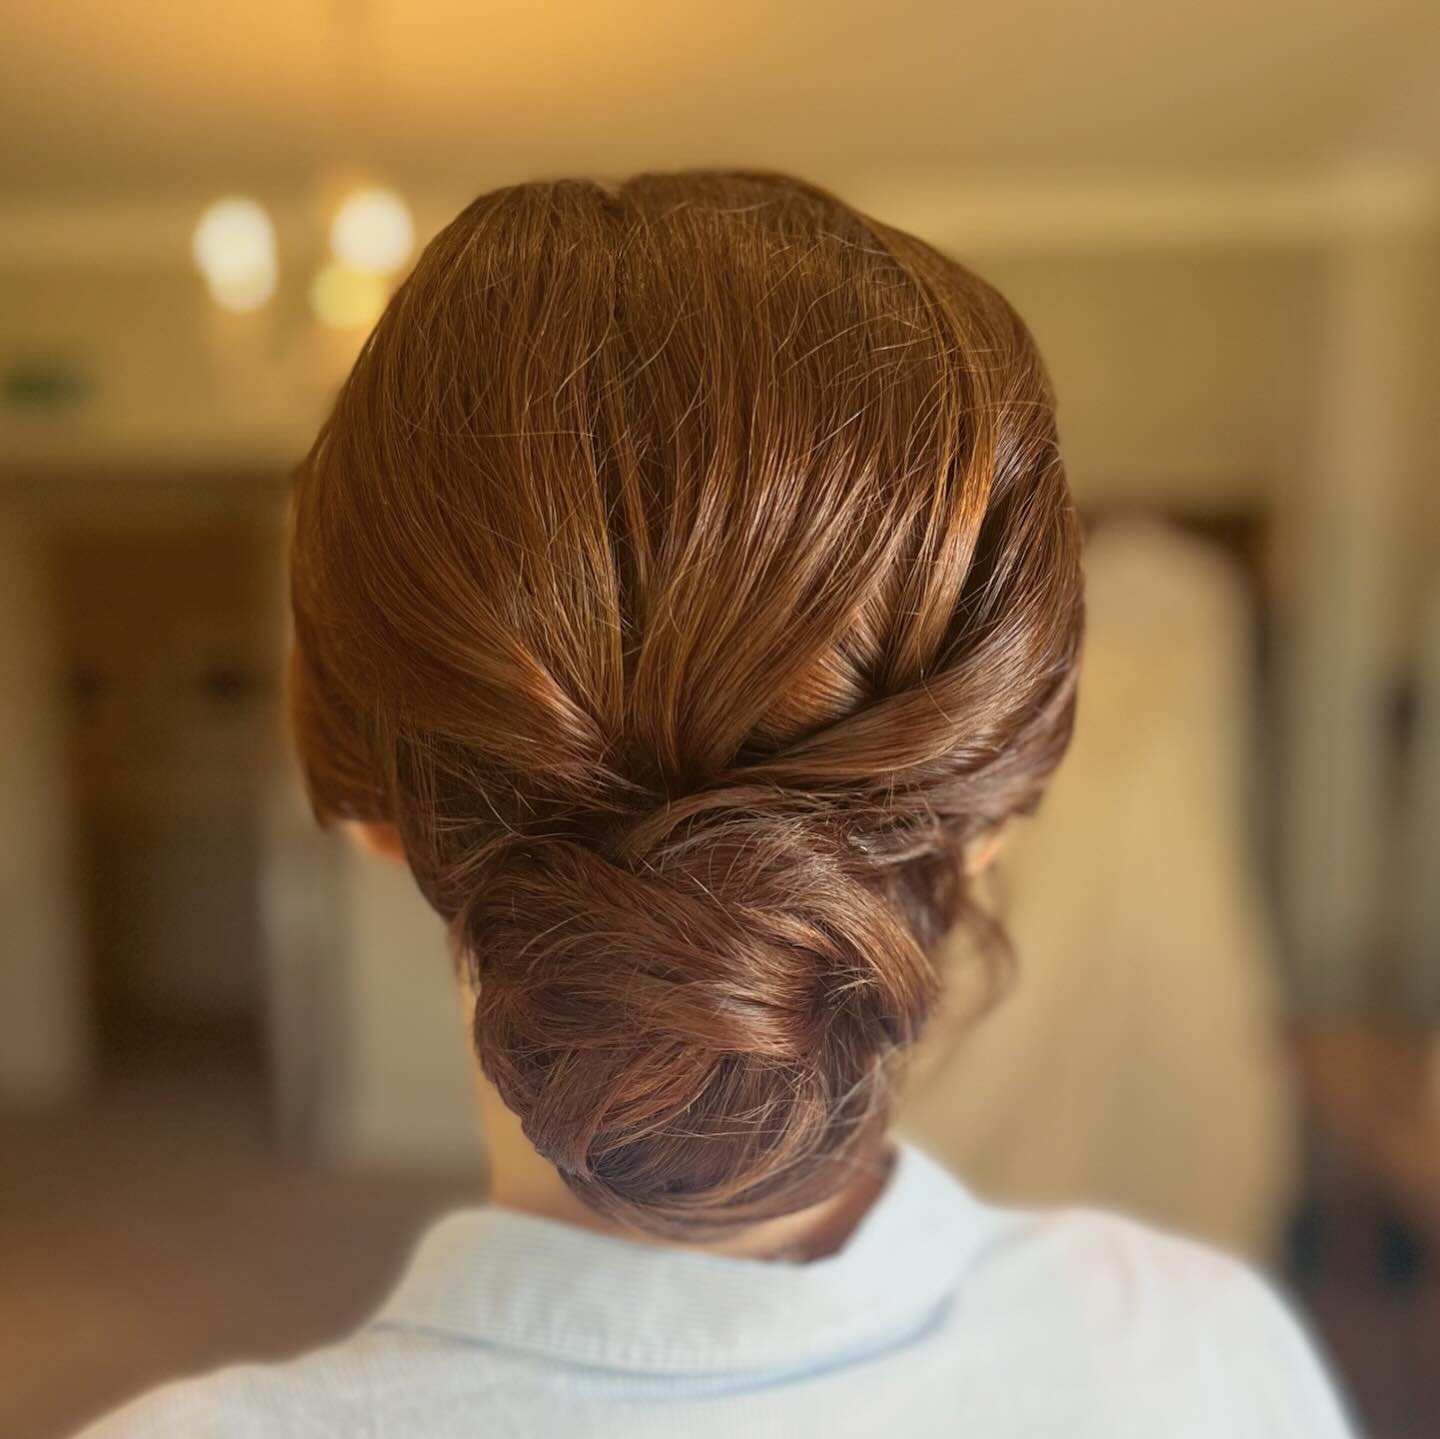 ✨ Chignon ✨

Is your hair the type of hair that does not hold a curl no matter how much you will it to? 

This timeless and elegant hairstyle could be the style for you! Whether you&rsquo;re the bride or a bridesmaid, a chignon is the perfect choice 